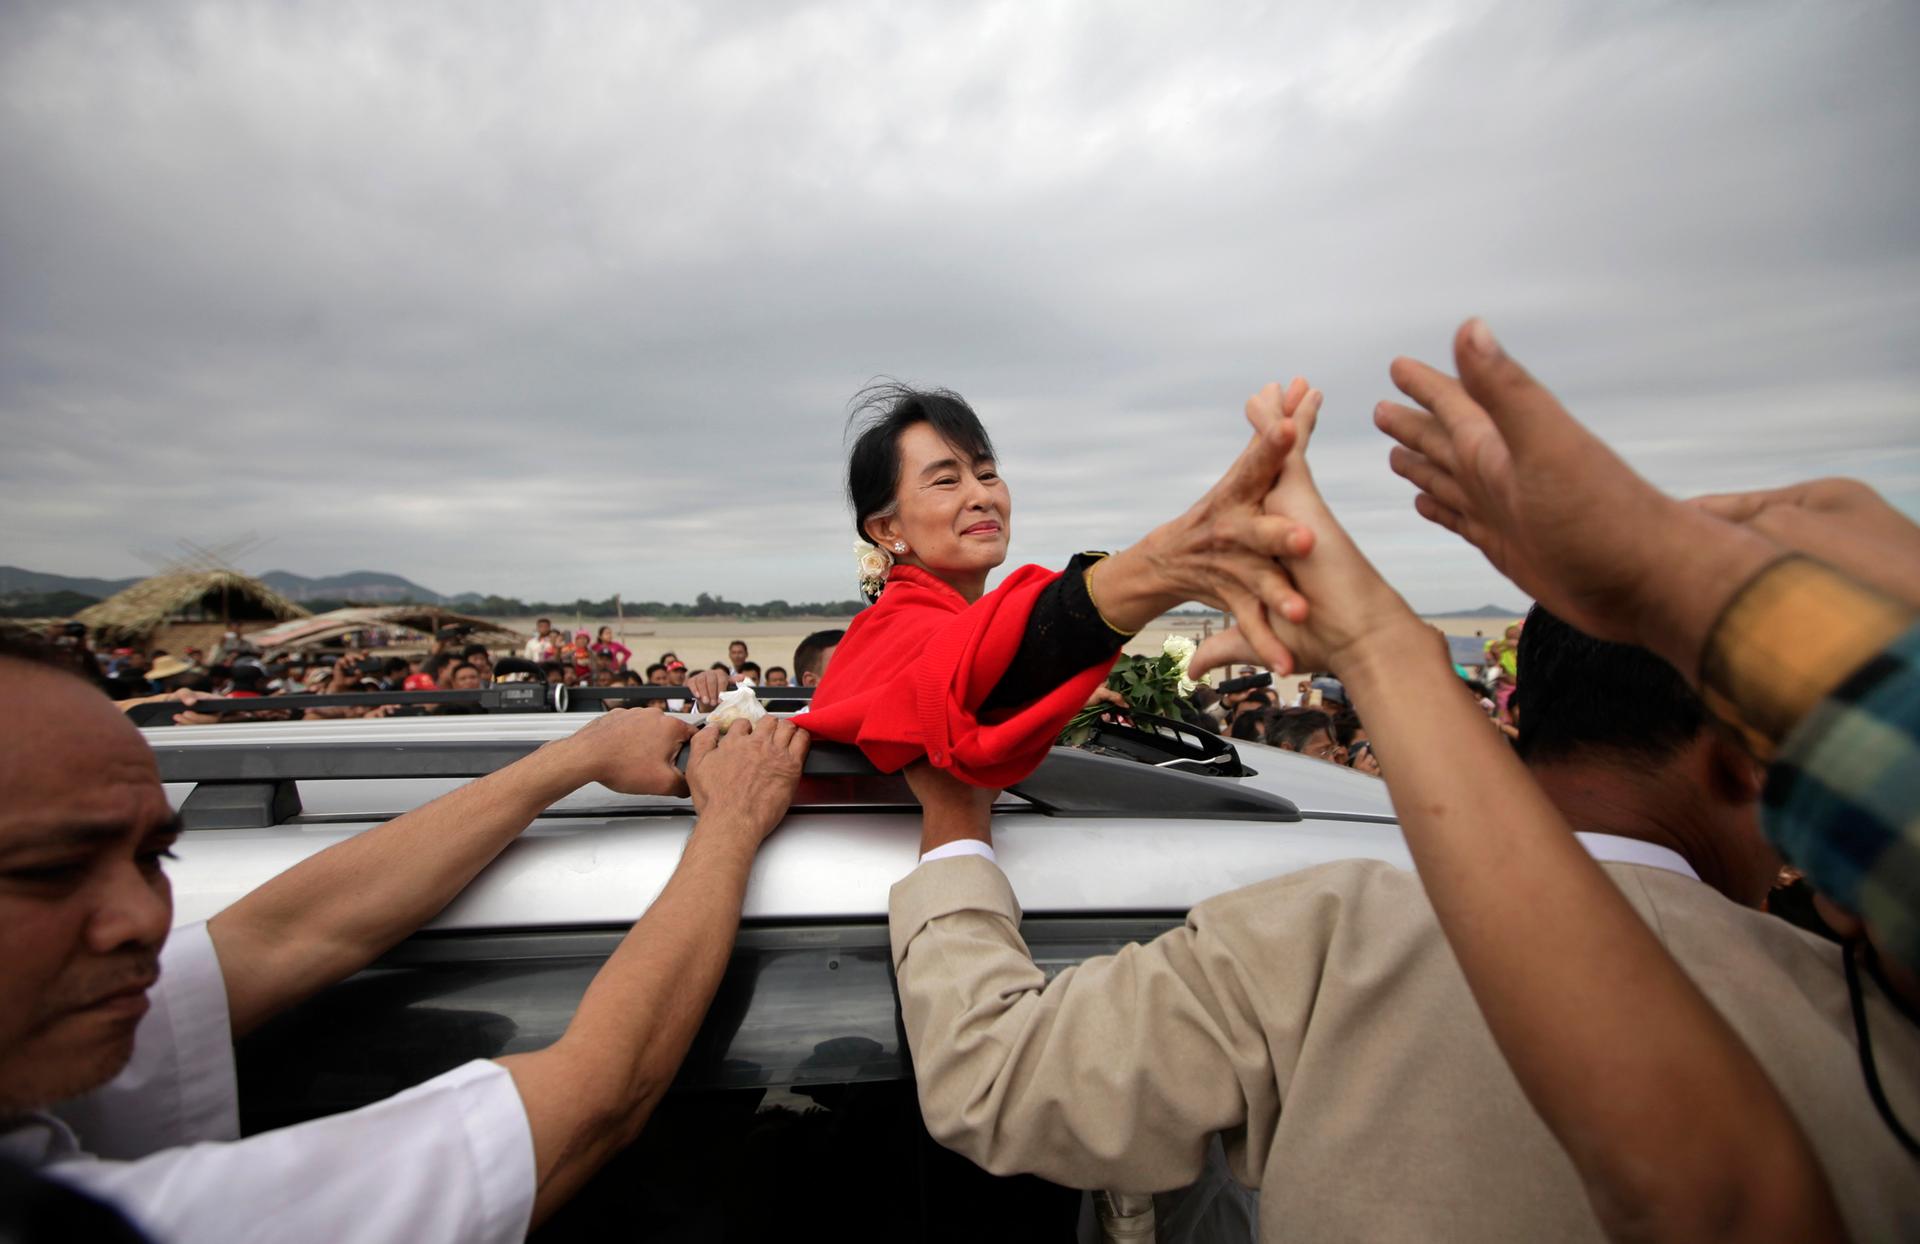 Myanmar pro-democracy leader Aung San Suu Kyi shakes hands with supporters after giving a speech in Monywa November 30, 2012.